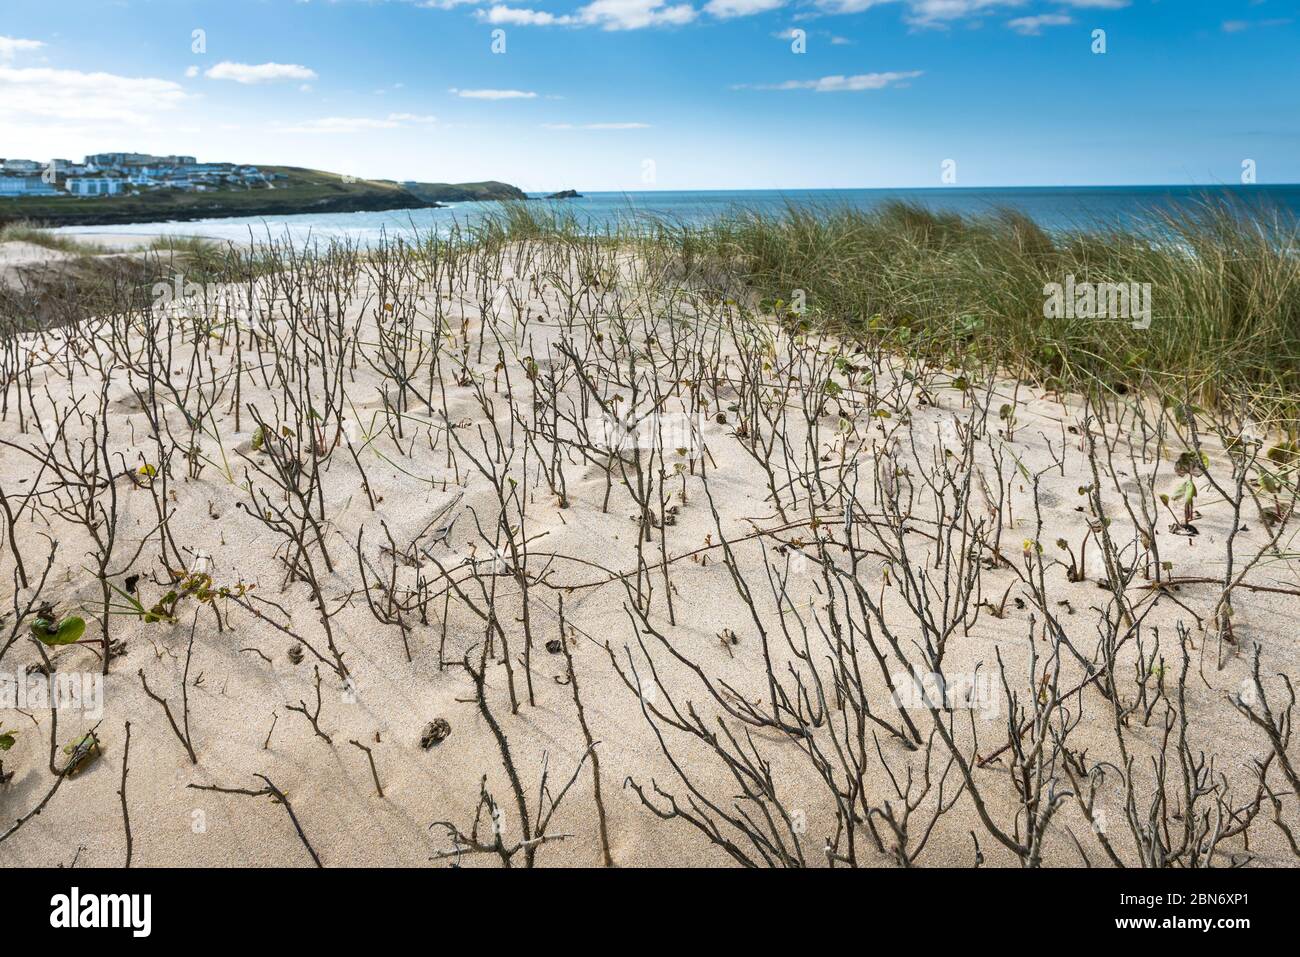 Vegetation growing on the sand dune system overlooking Fistral Beach in Newquay in Cornwall. Stock Photo